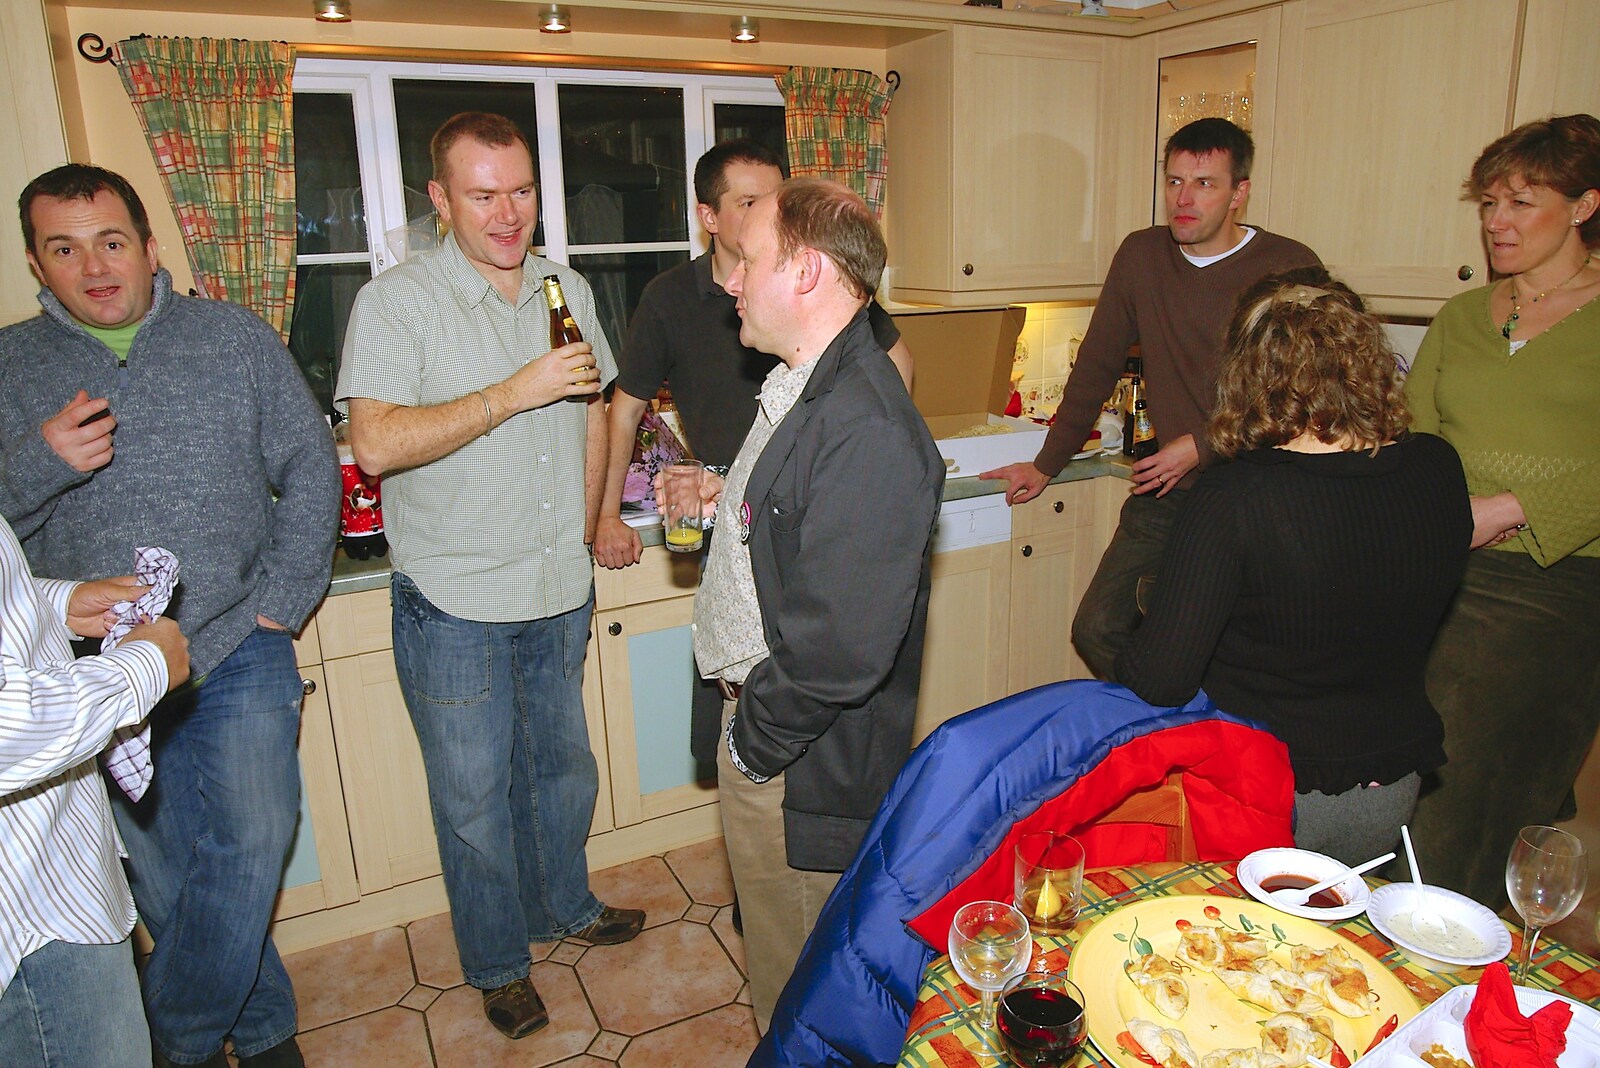 More kitchen action from Bill's Party, Papworth Everard, Cambridgeshire - 9th December 2006